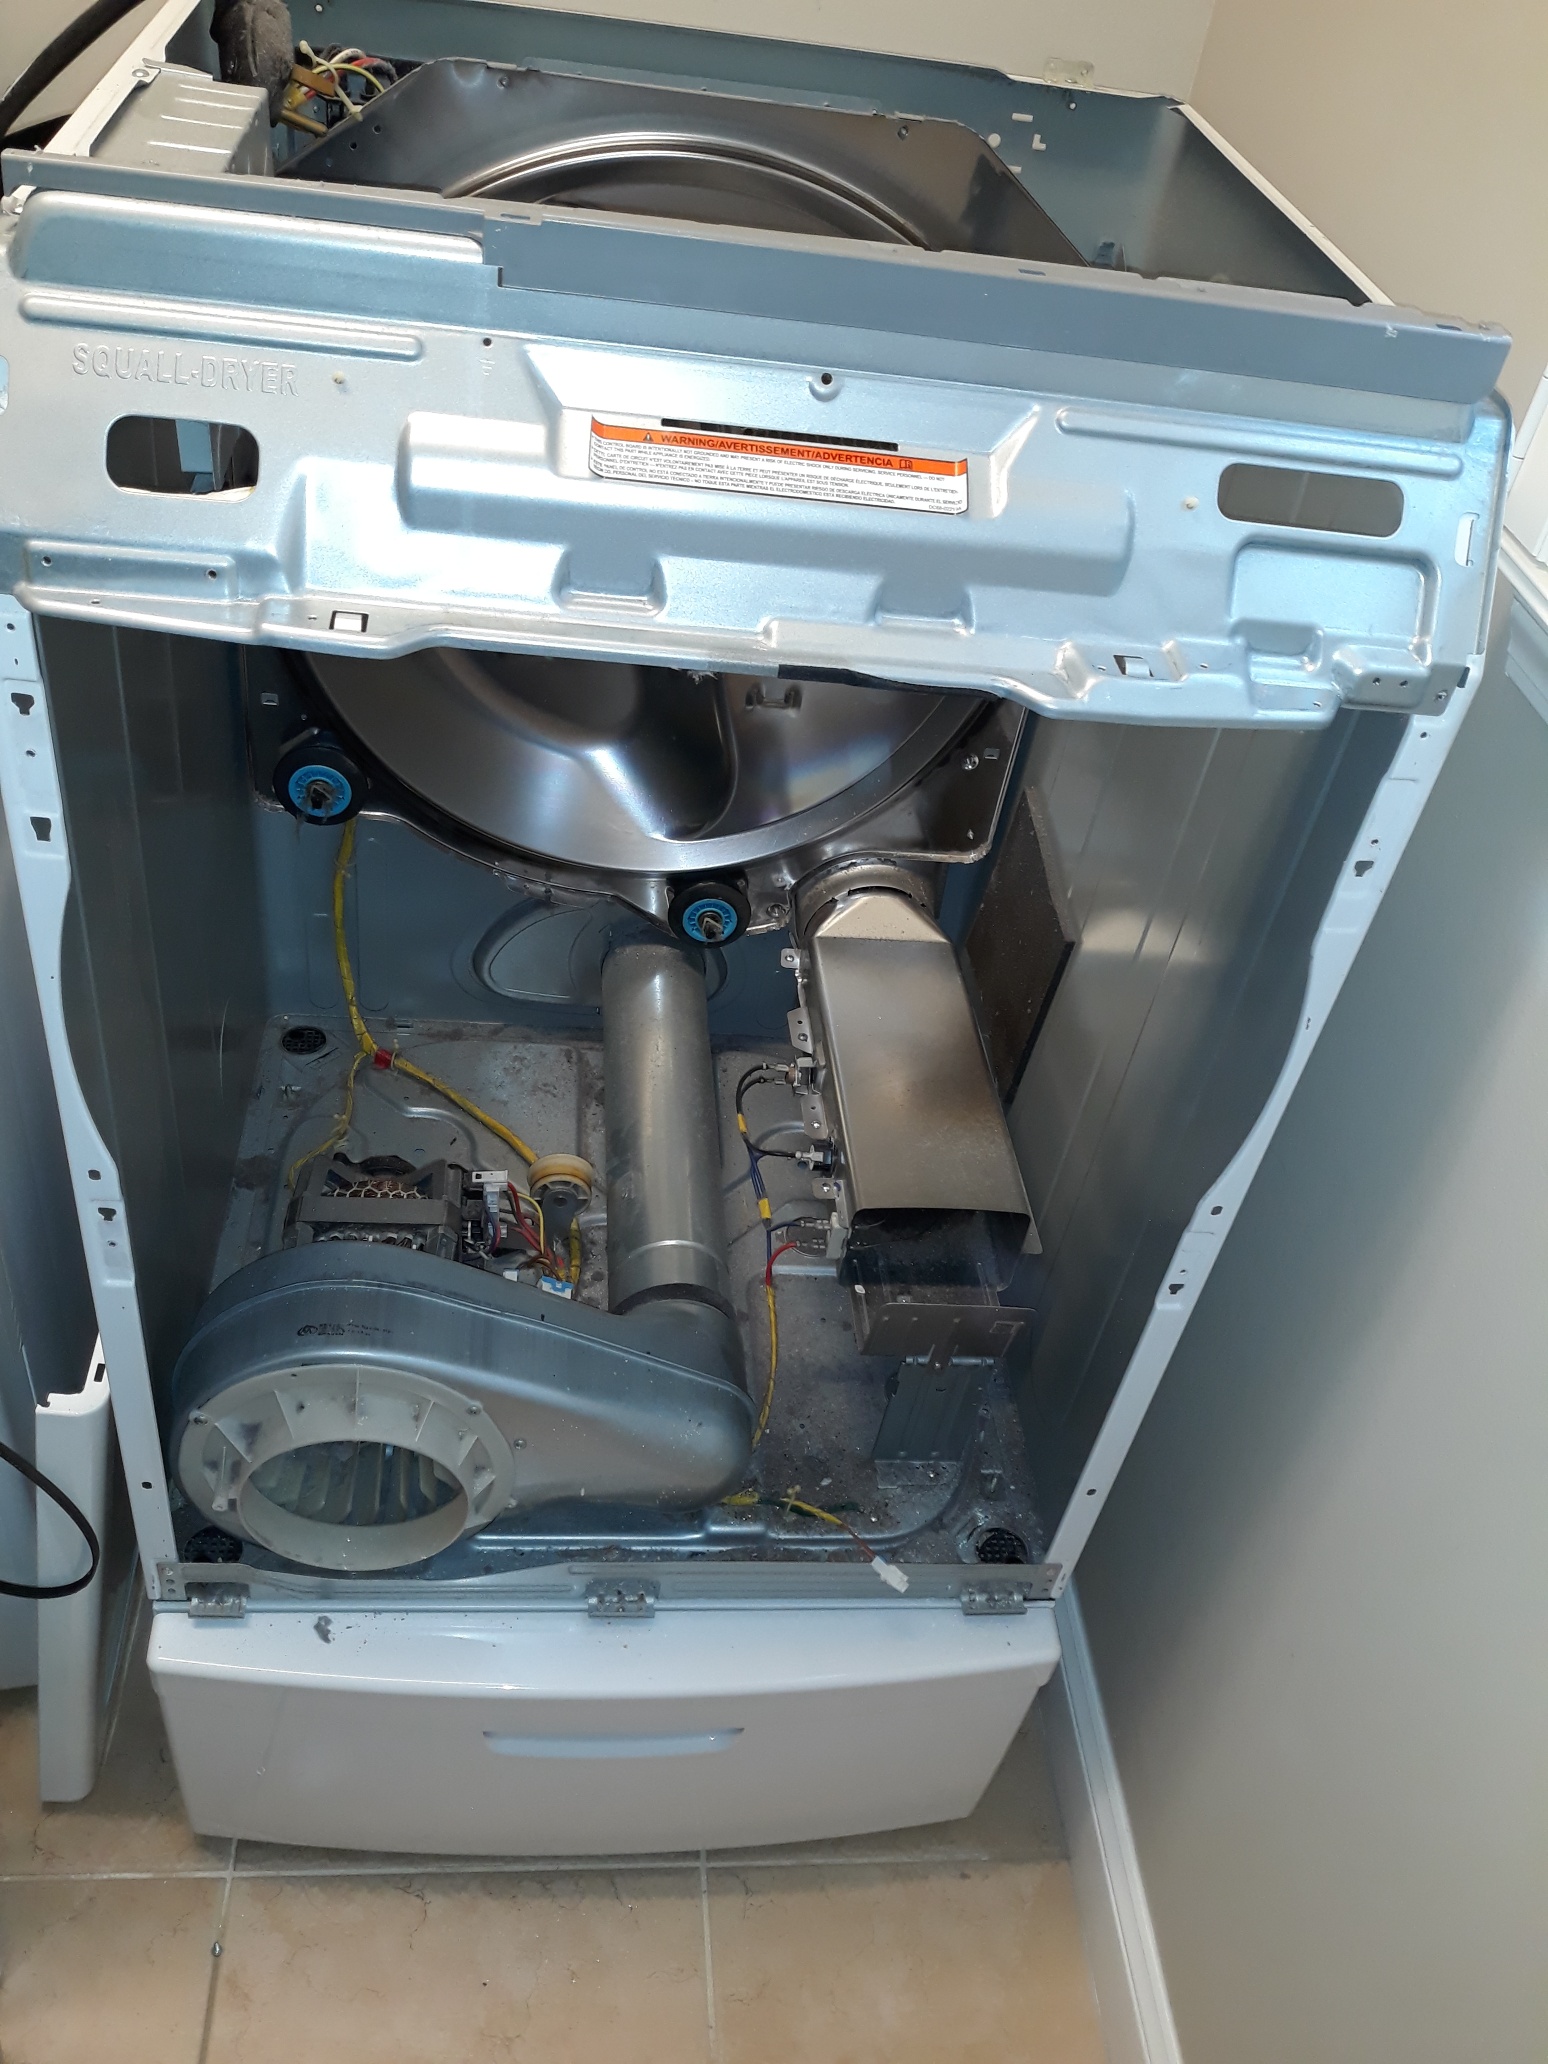 appliance repair dryer repair required replacement of the broken drum belt and idler pulley assembly ne 120th rd oxford fl 34484